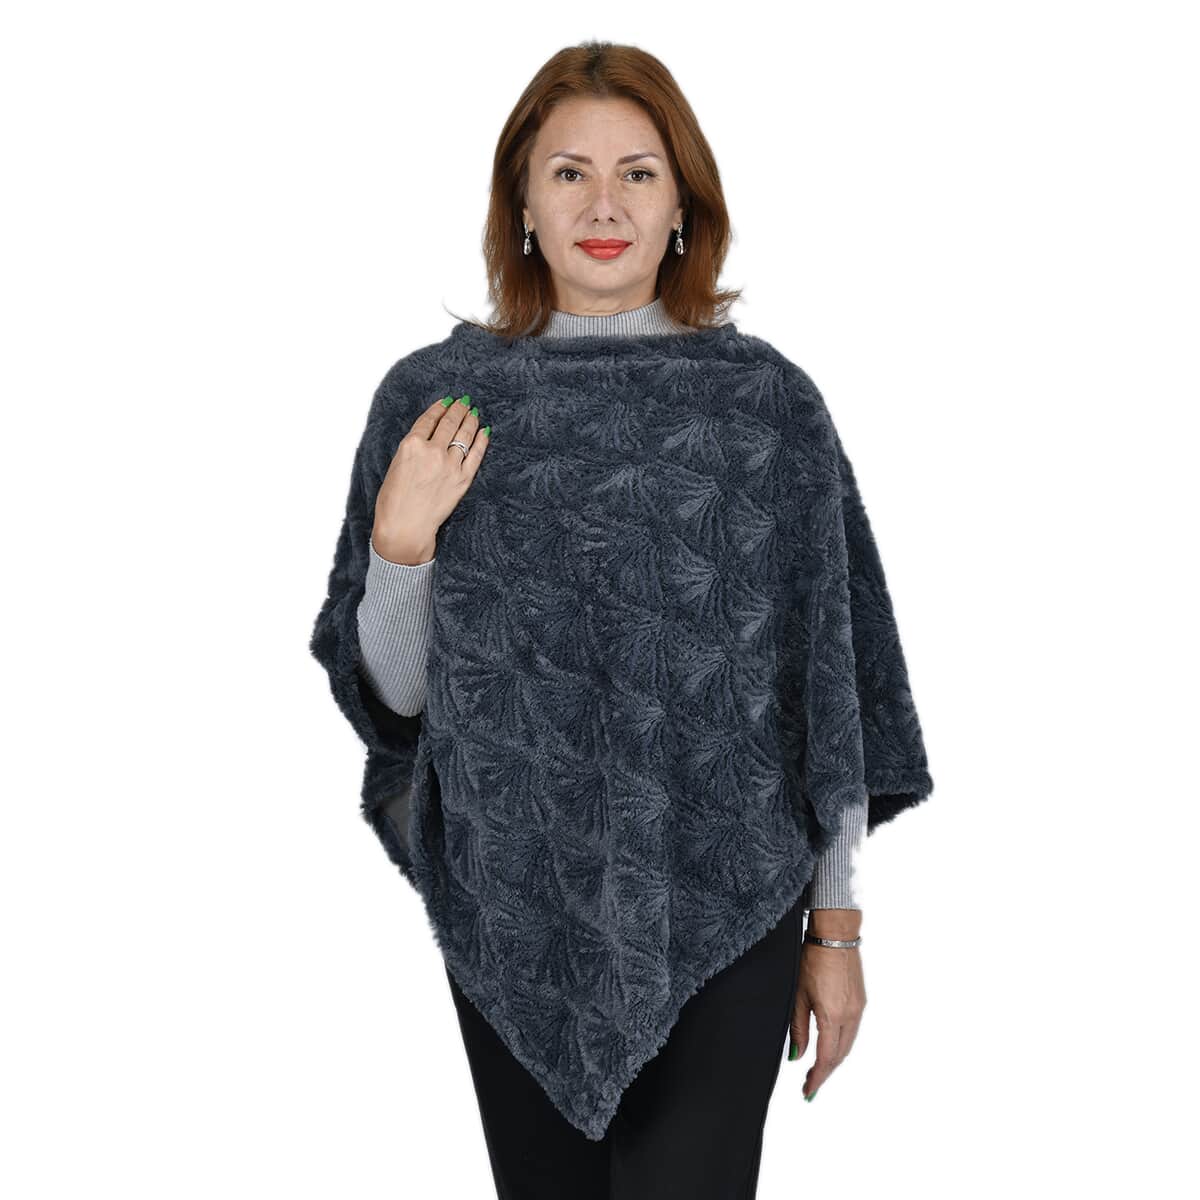 " PASSAGE Faux fur poncho Material: 100% polyester. Size: W33.5XL39 inch Weight:185g Color: Black " image number 2